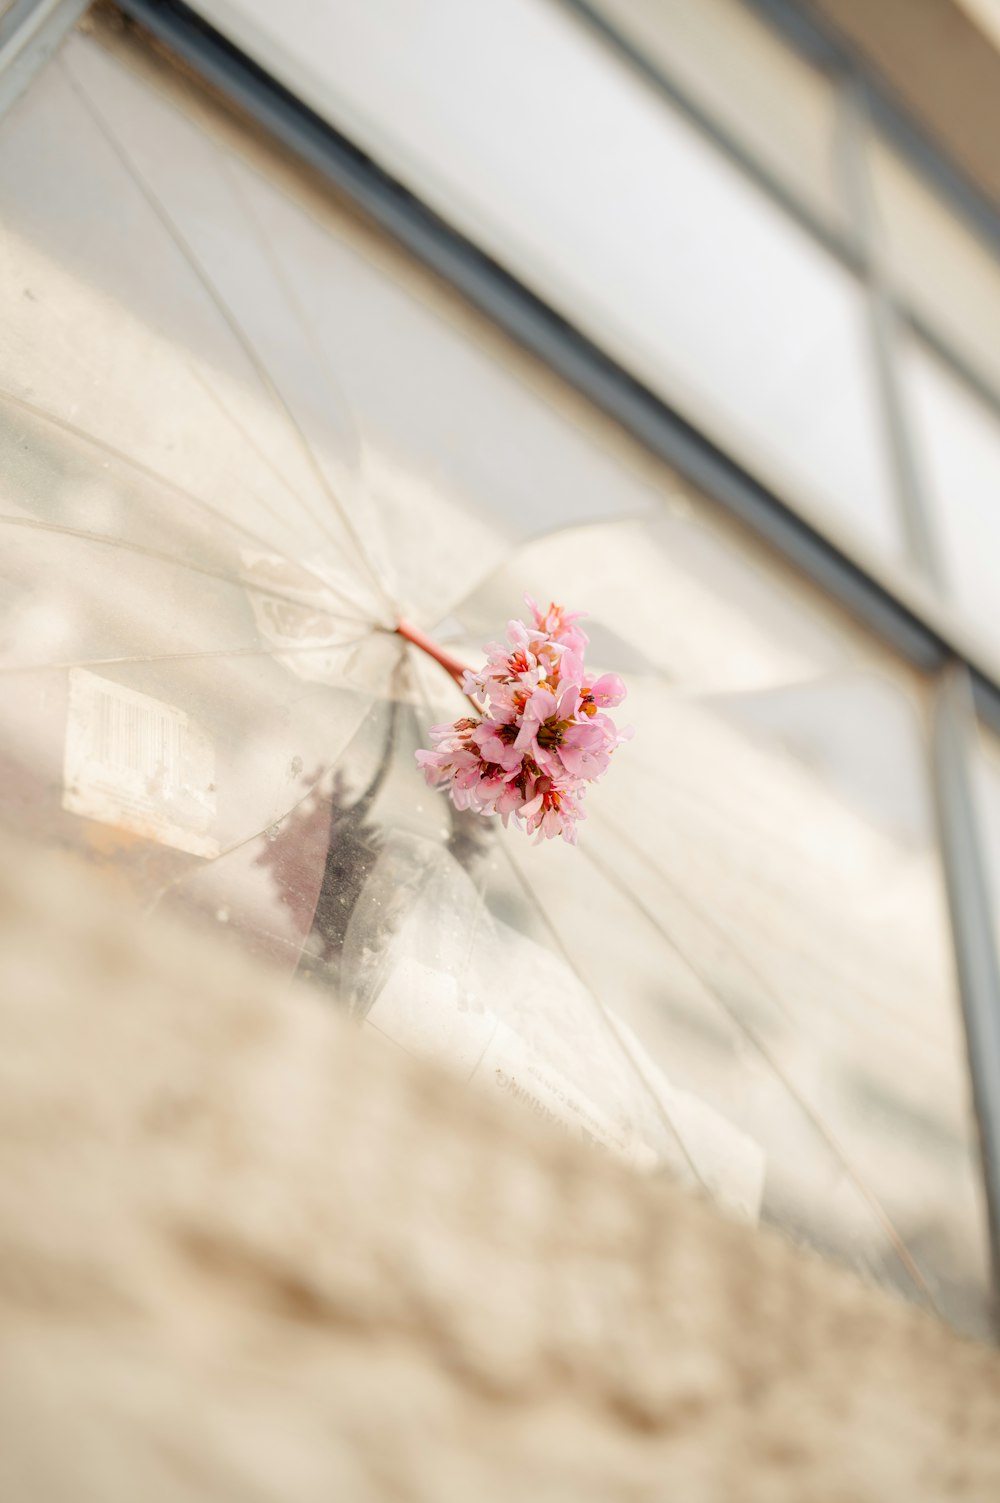 pink petaled flower on glass surface